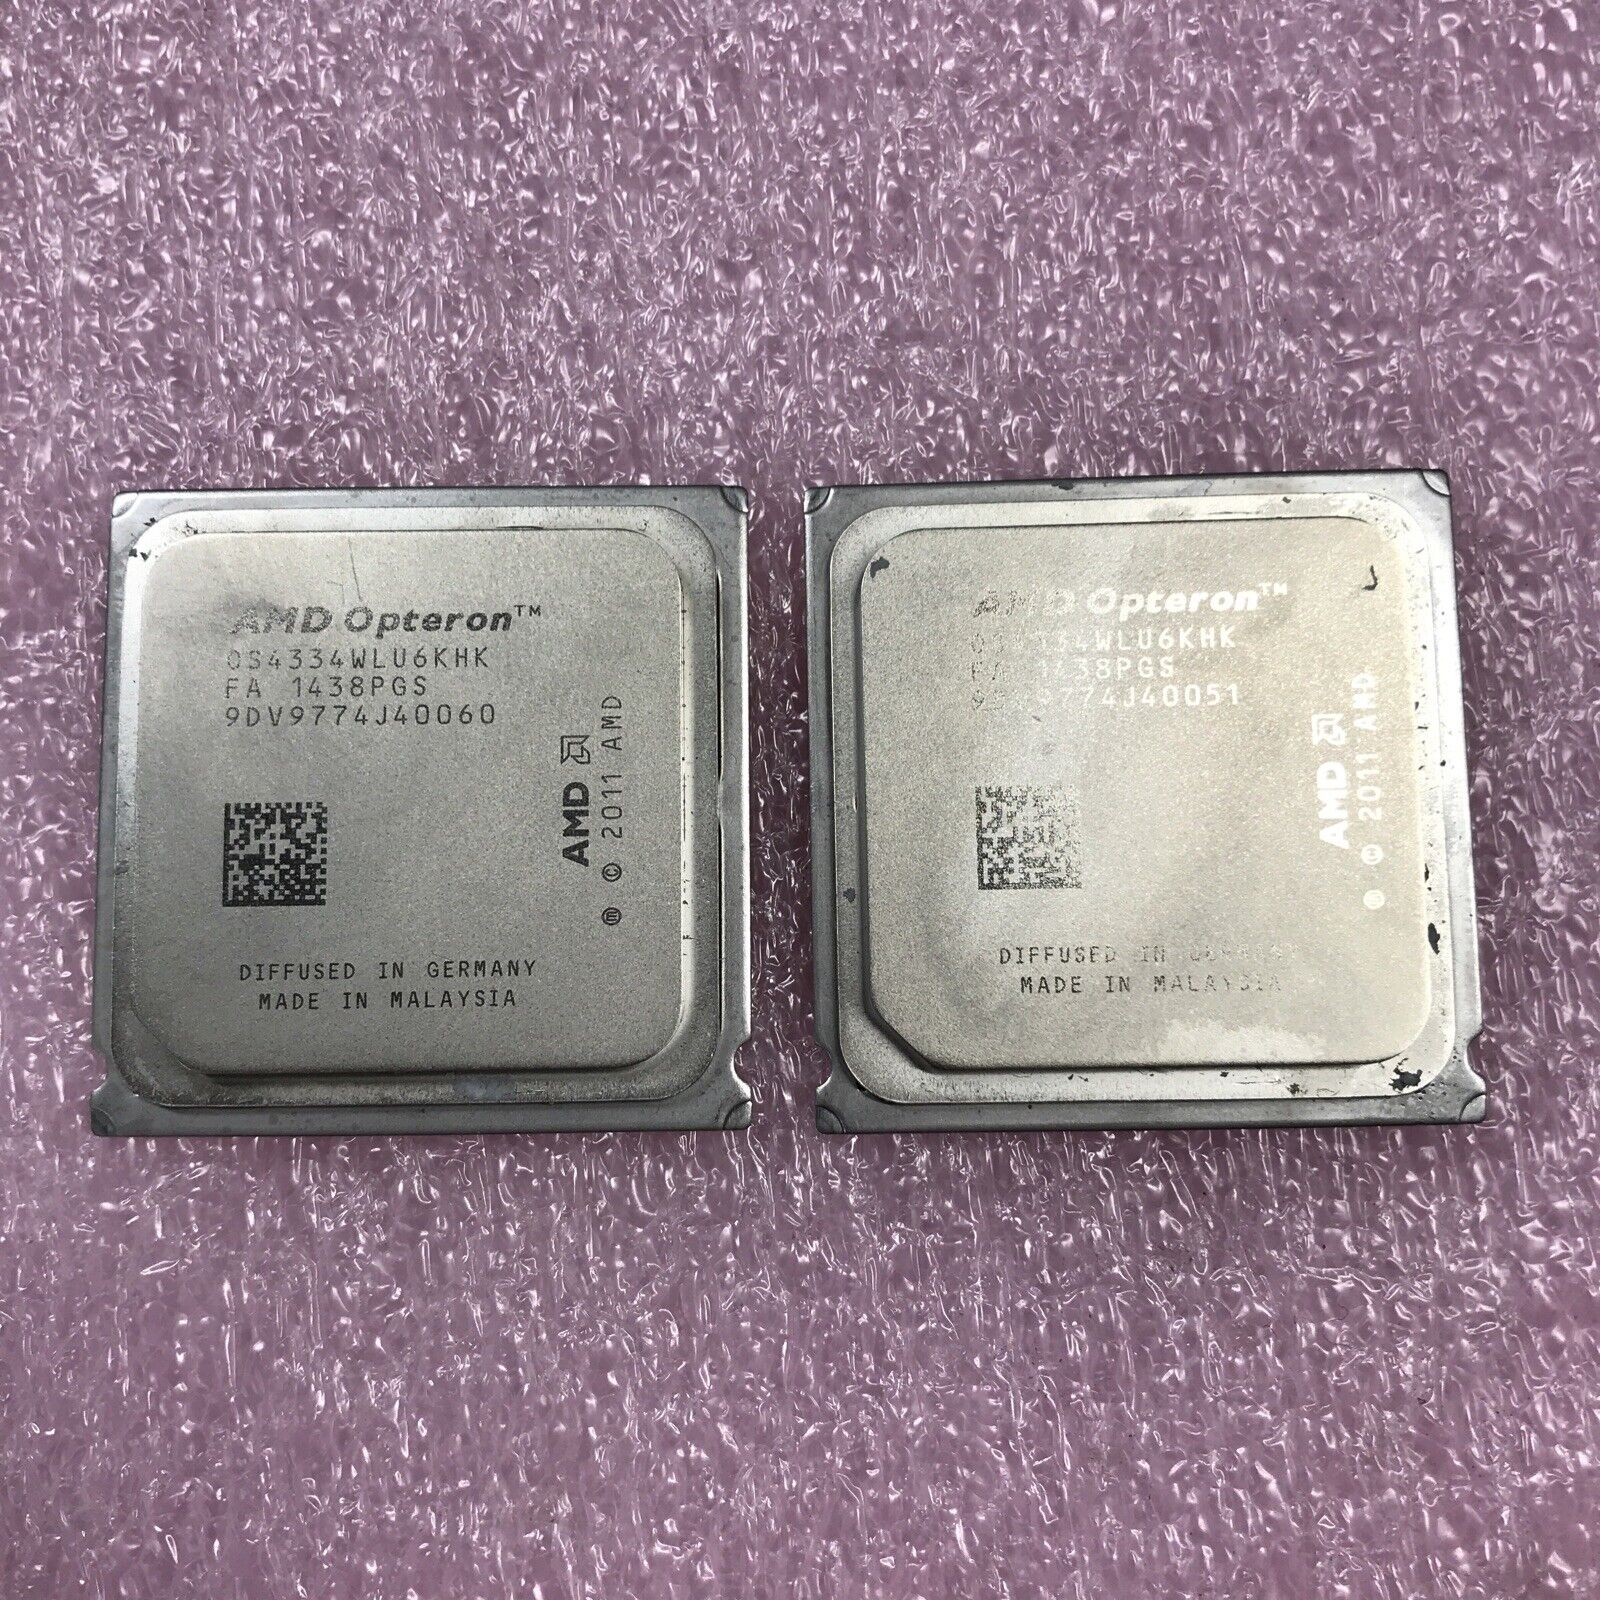 (Lot of 2) AMD Opteron 0S4334WLU6KHK (Tested and Working)